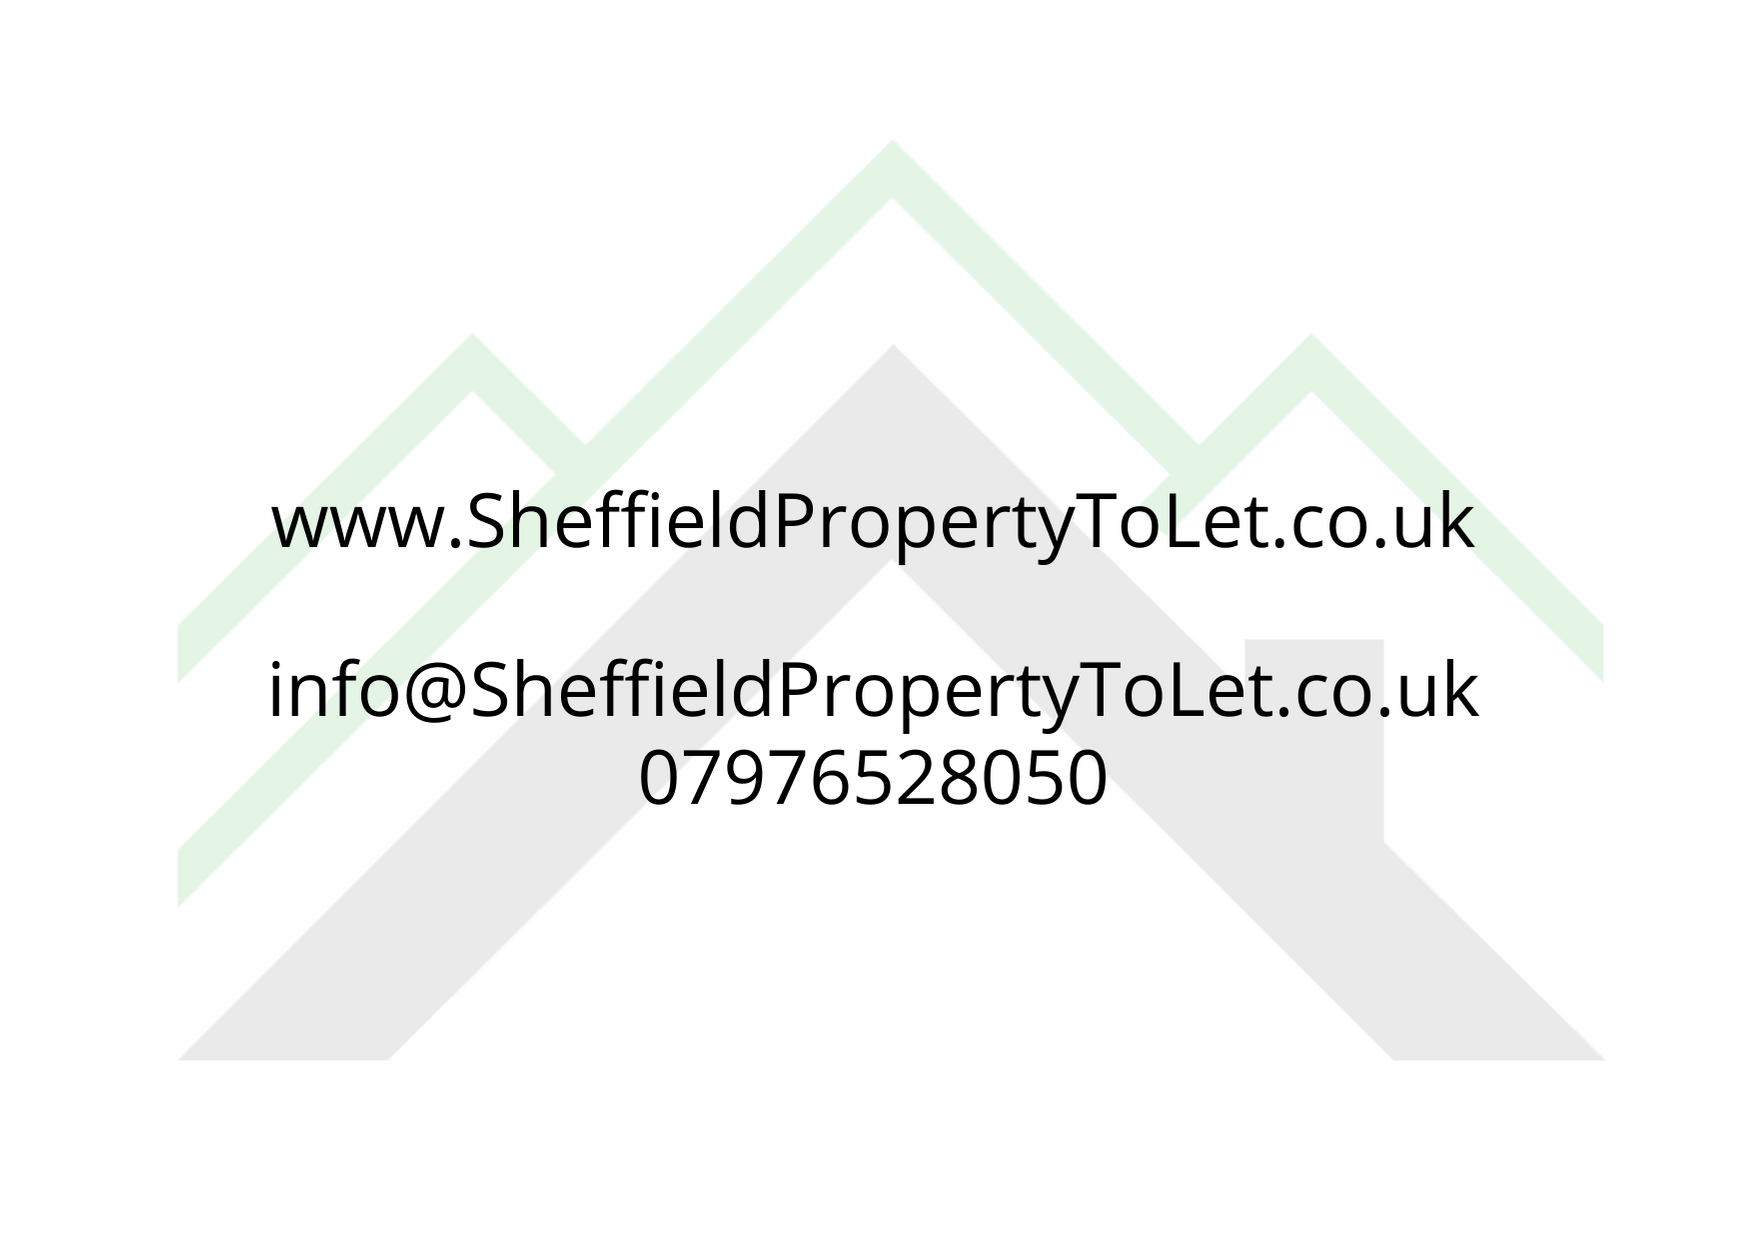 Sheffield Property to Let details 